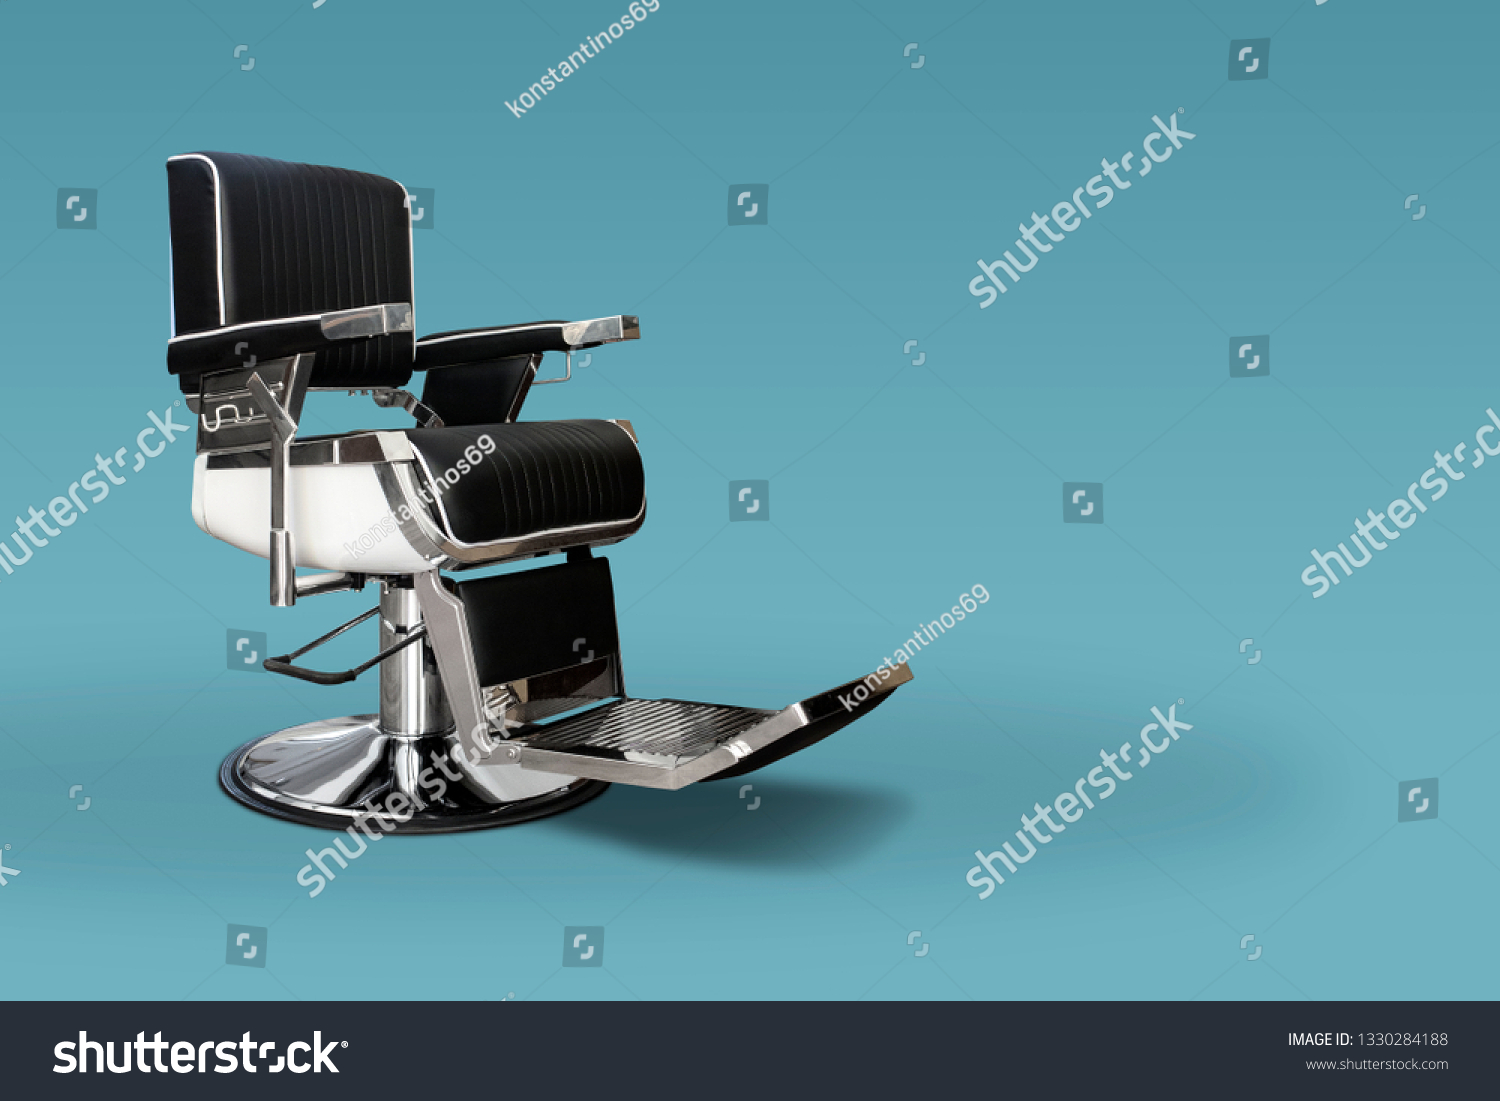 Barber chair with copy space #1330284188